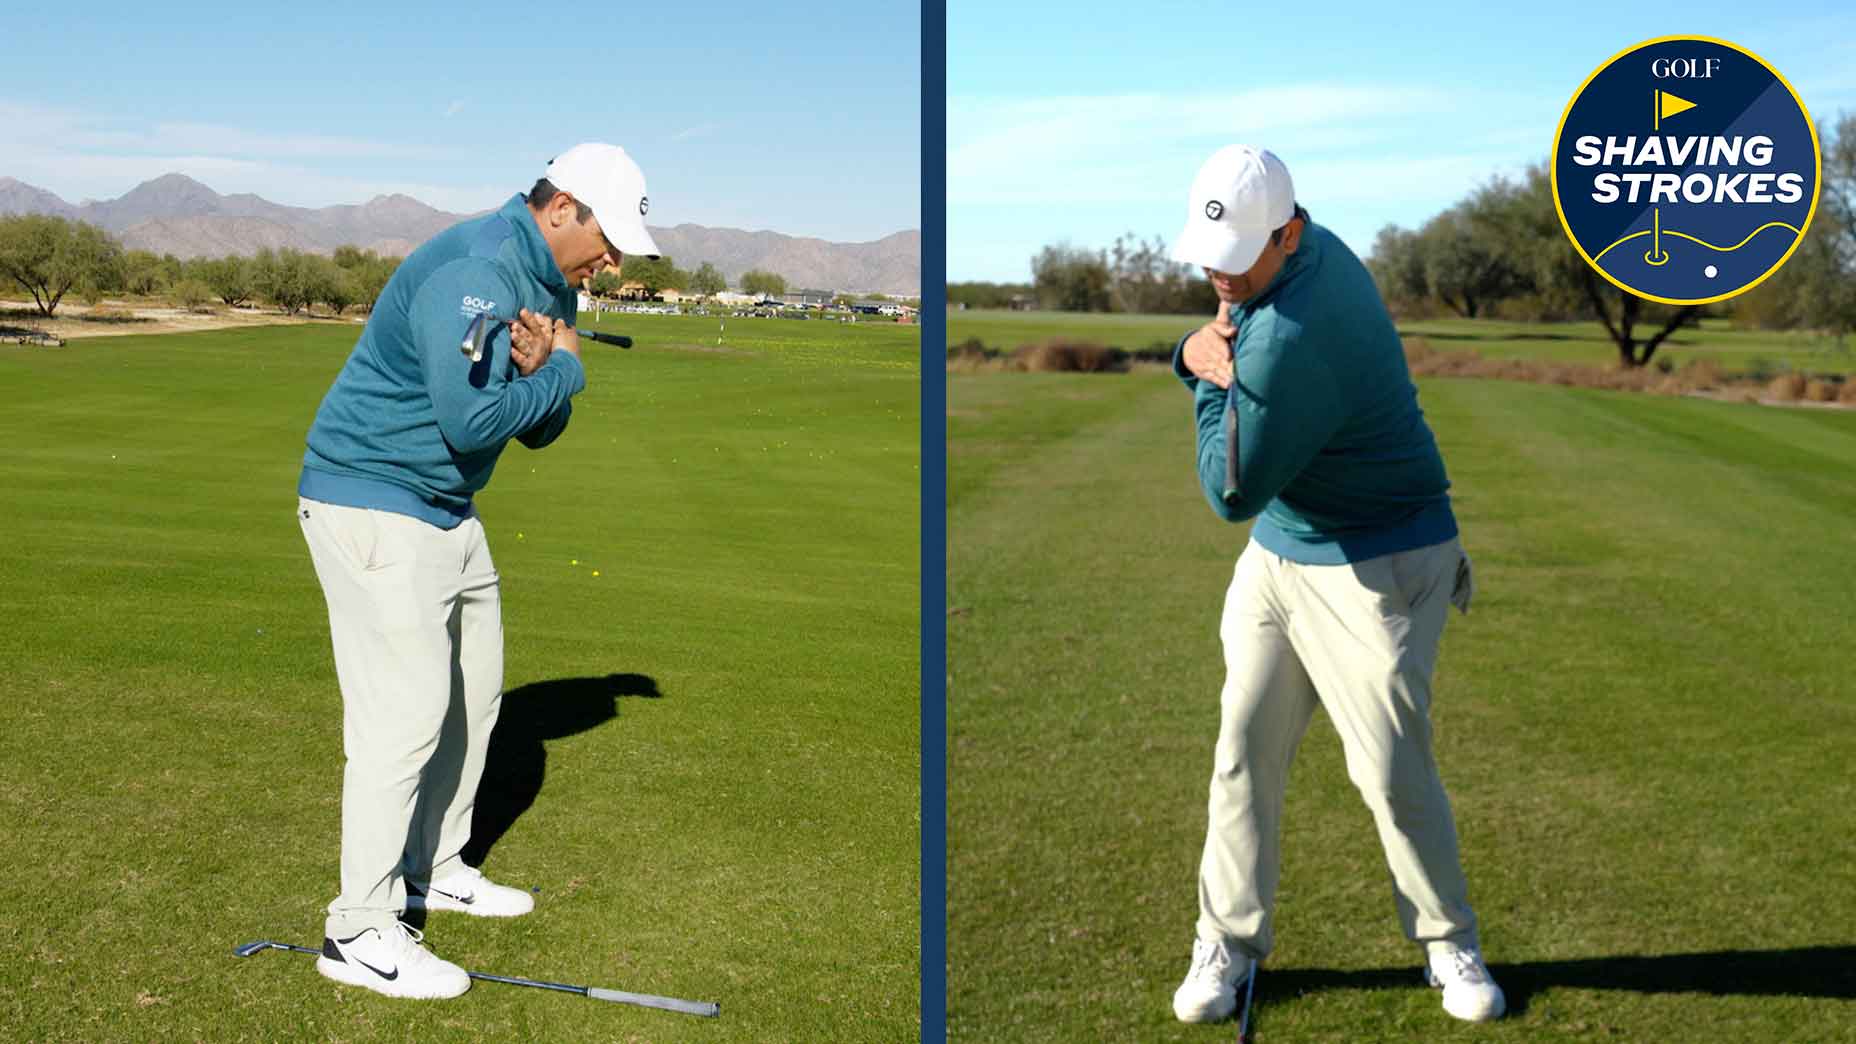 If you're looking to increase clubhead speed for more distance, golf instructor Nick Novak says using this coil drill will help